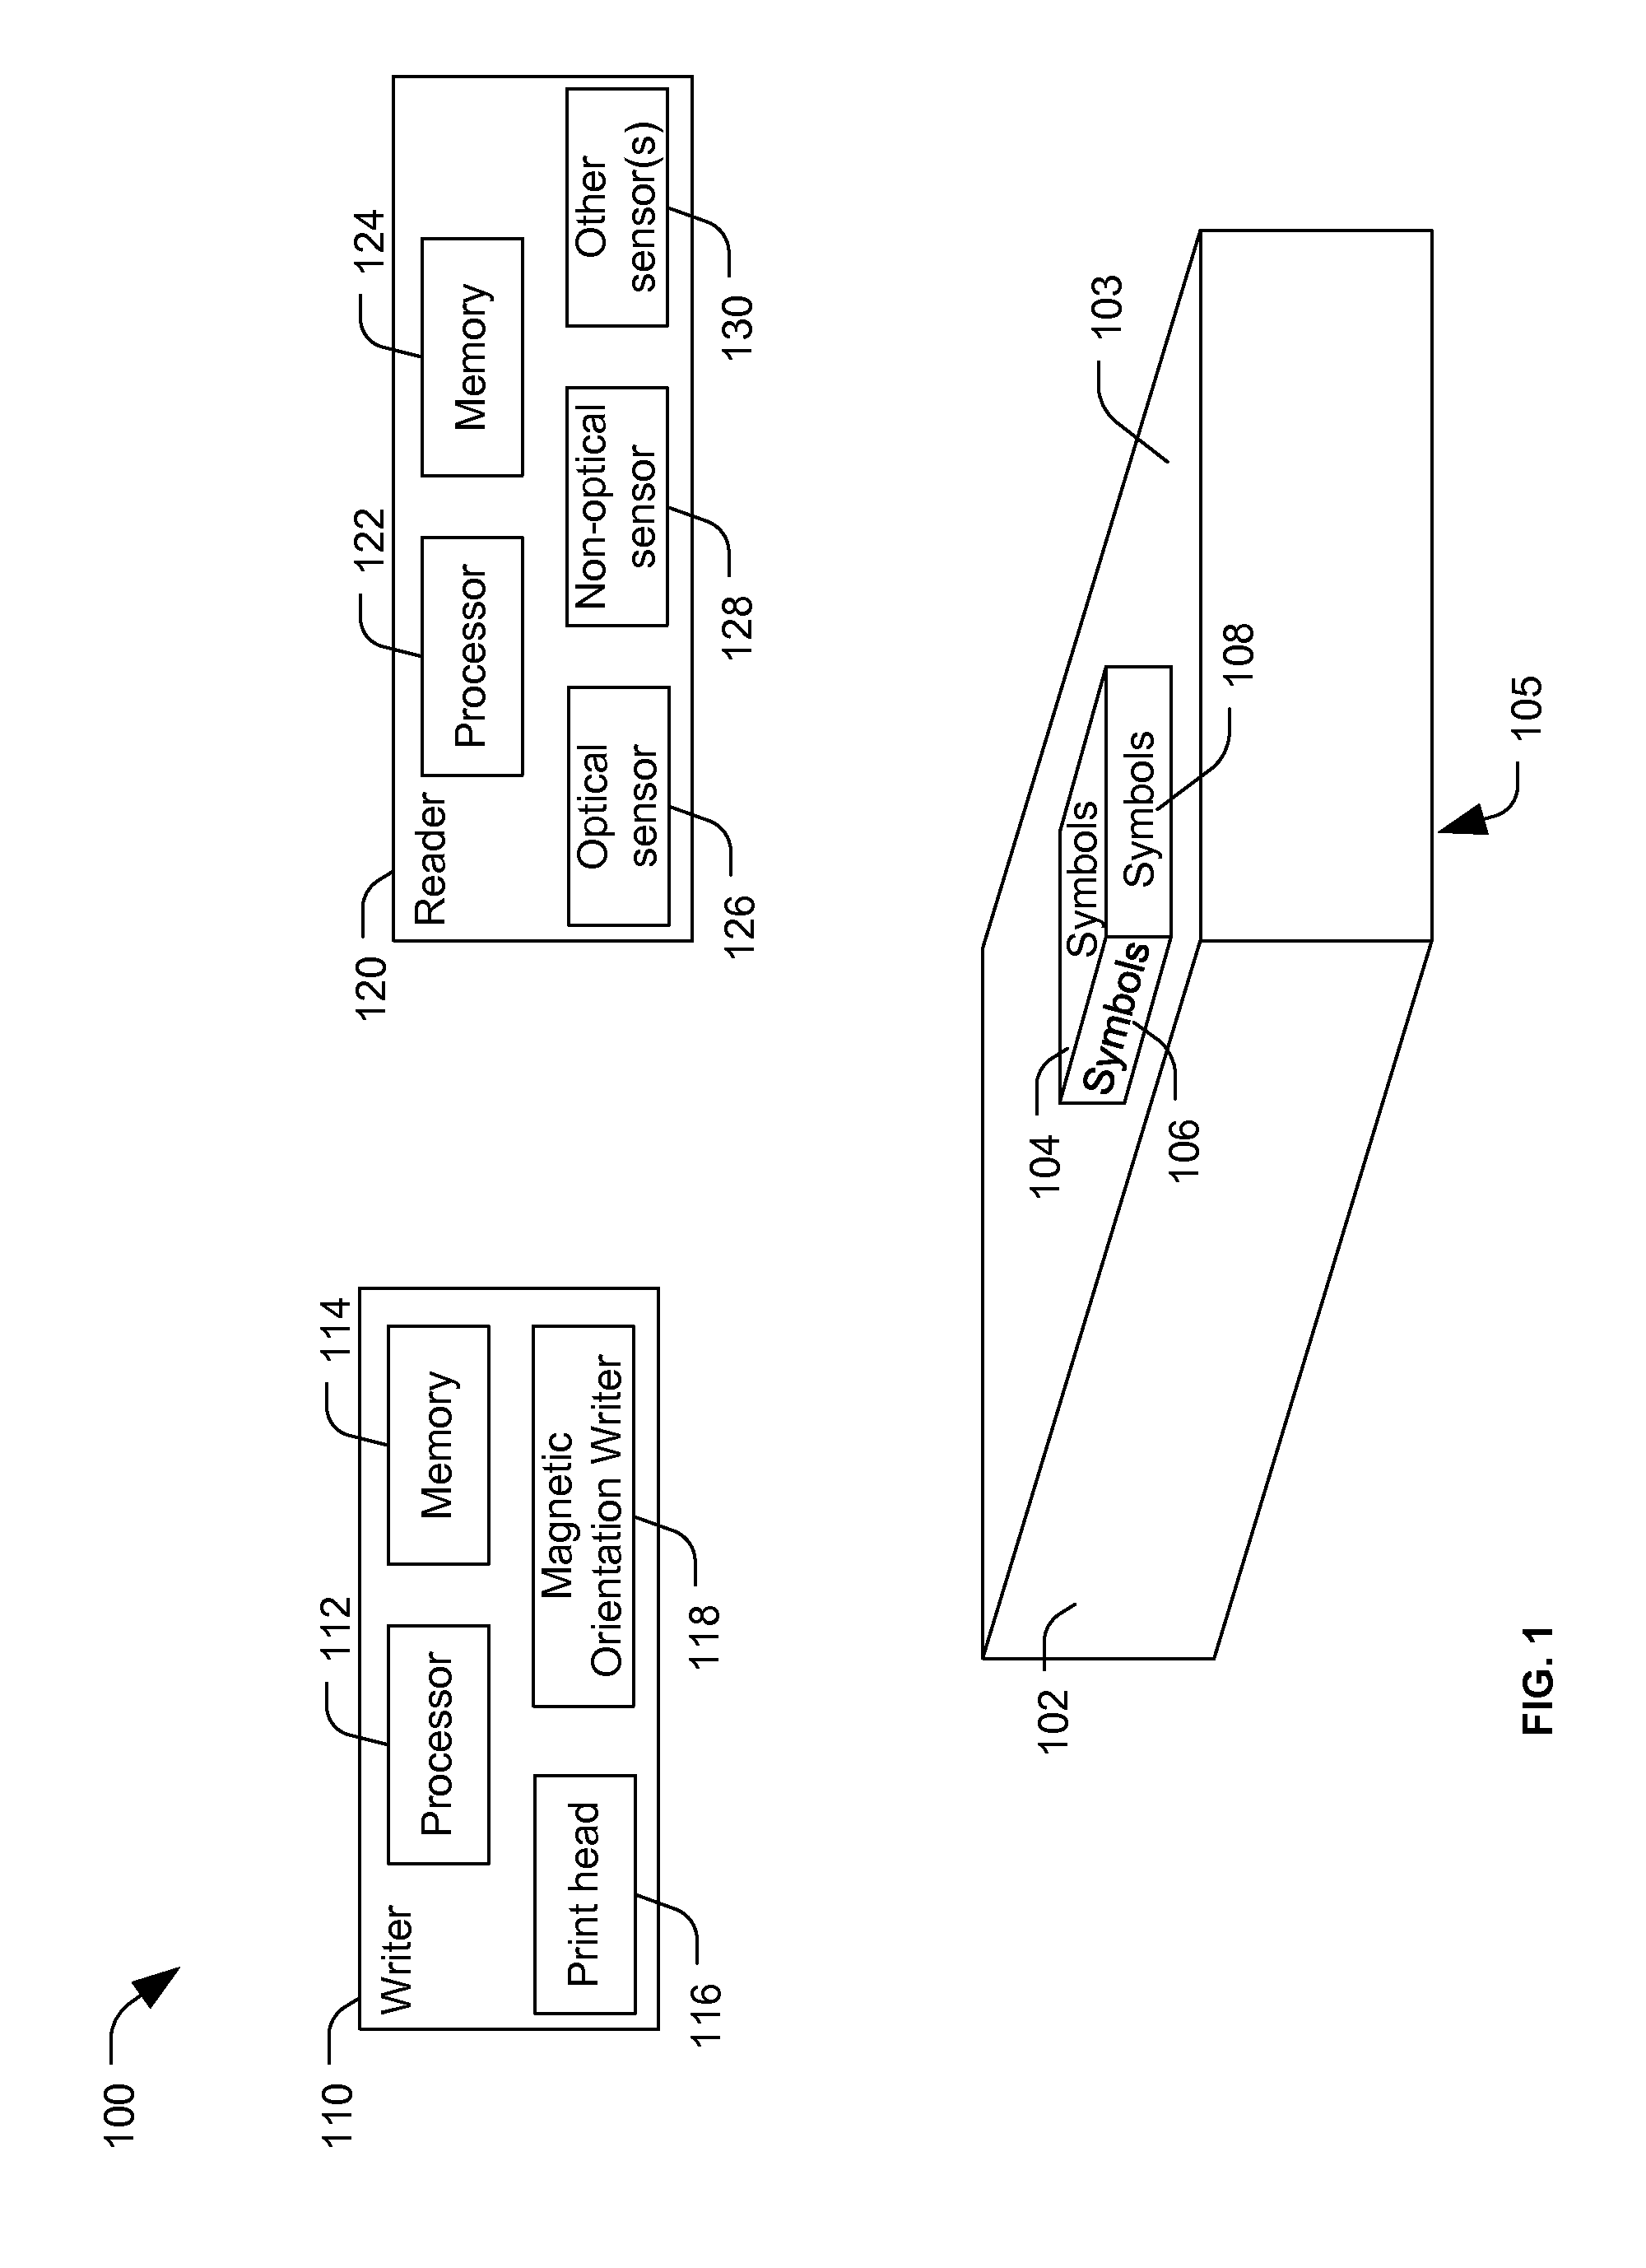 Encoding information in multiple patterned layers